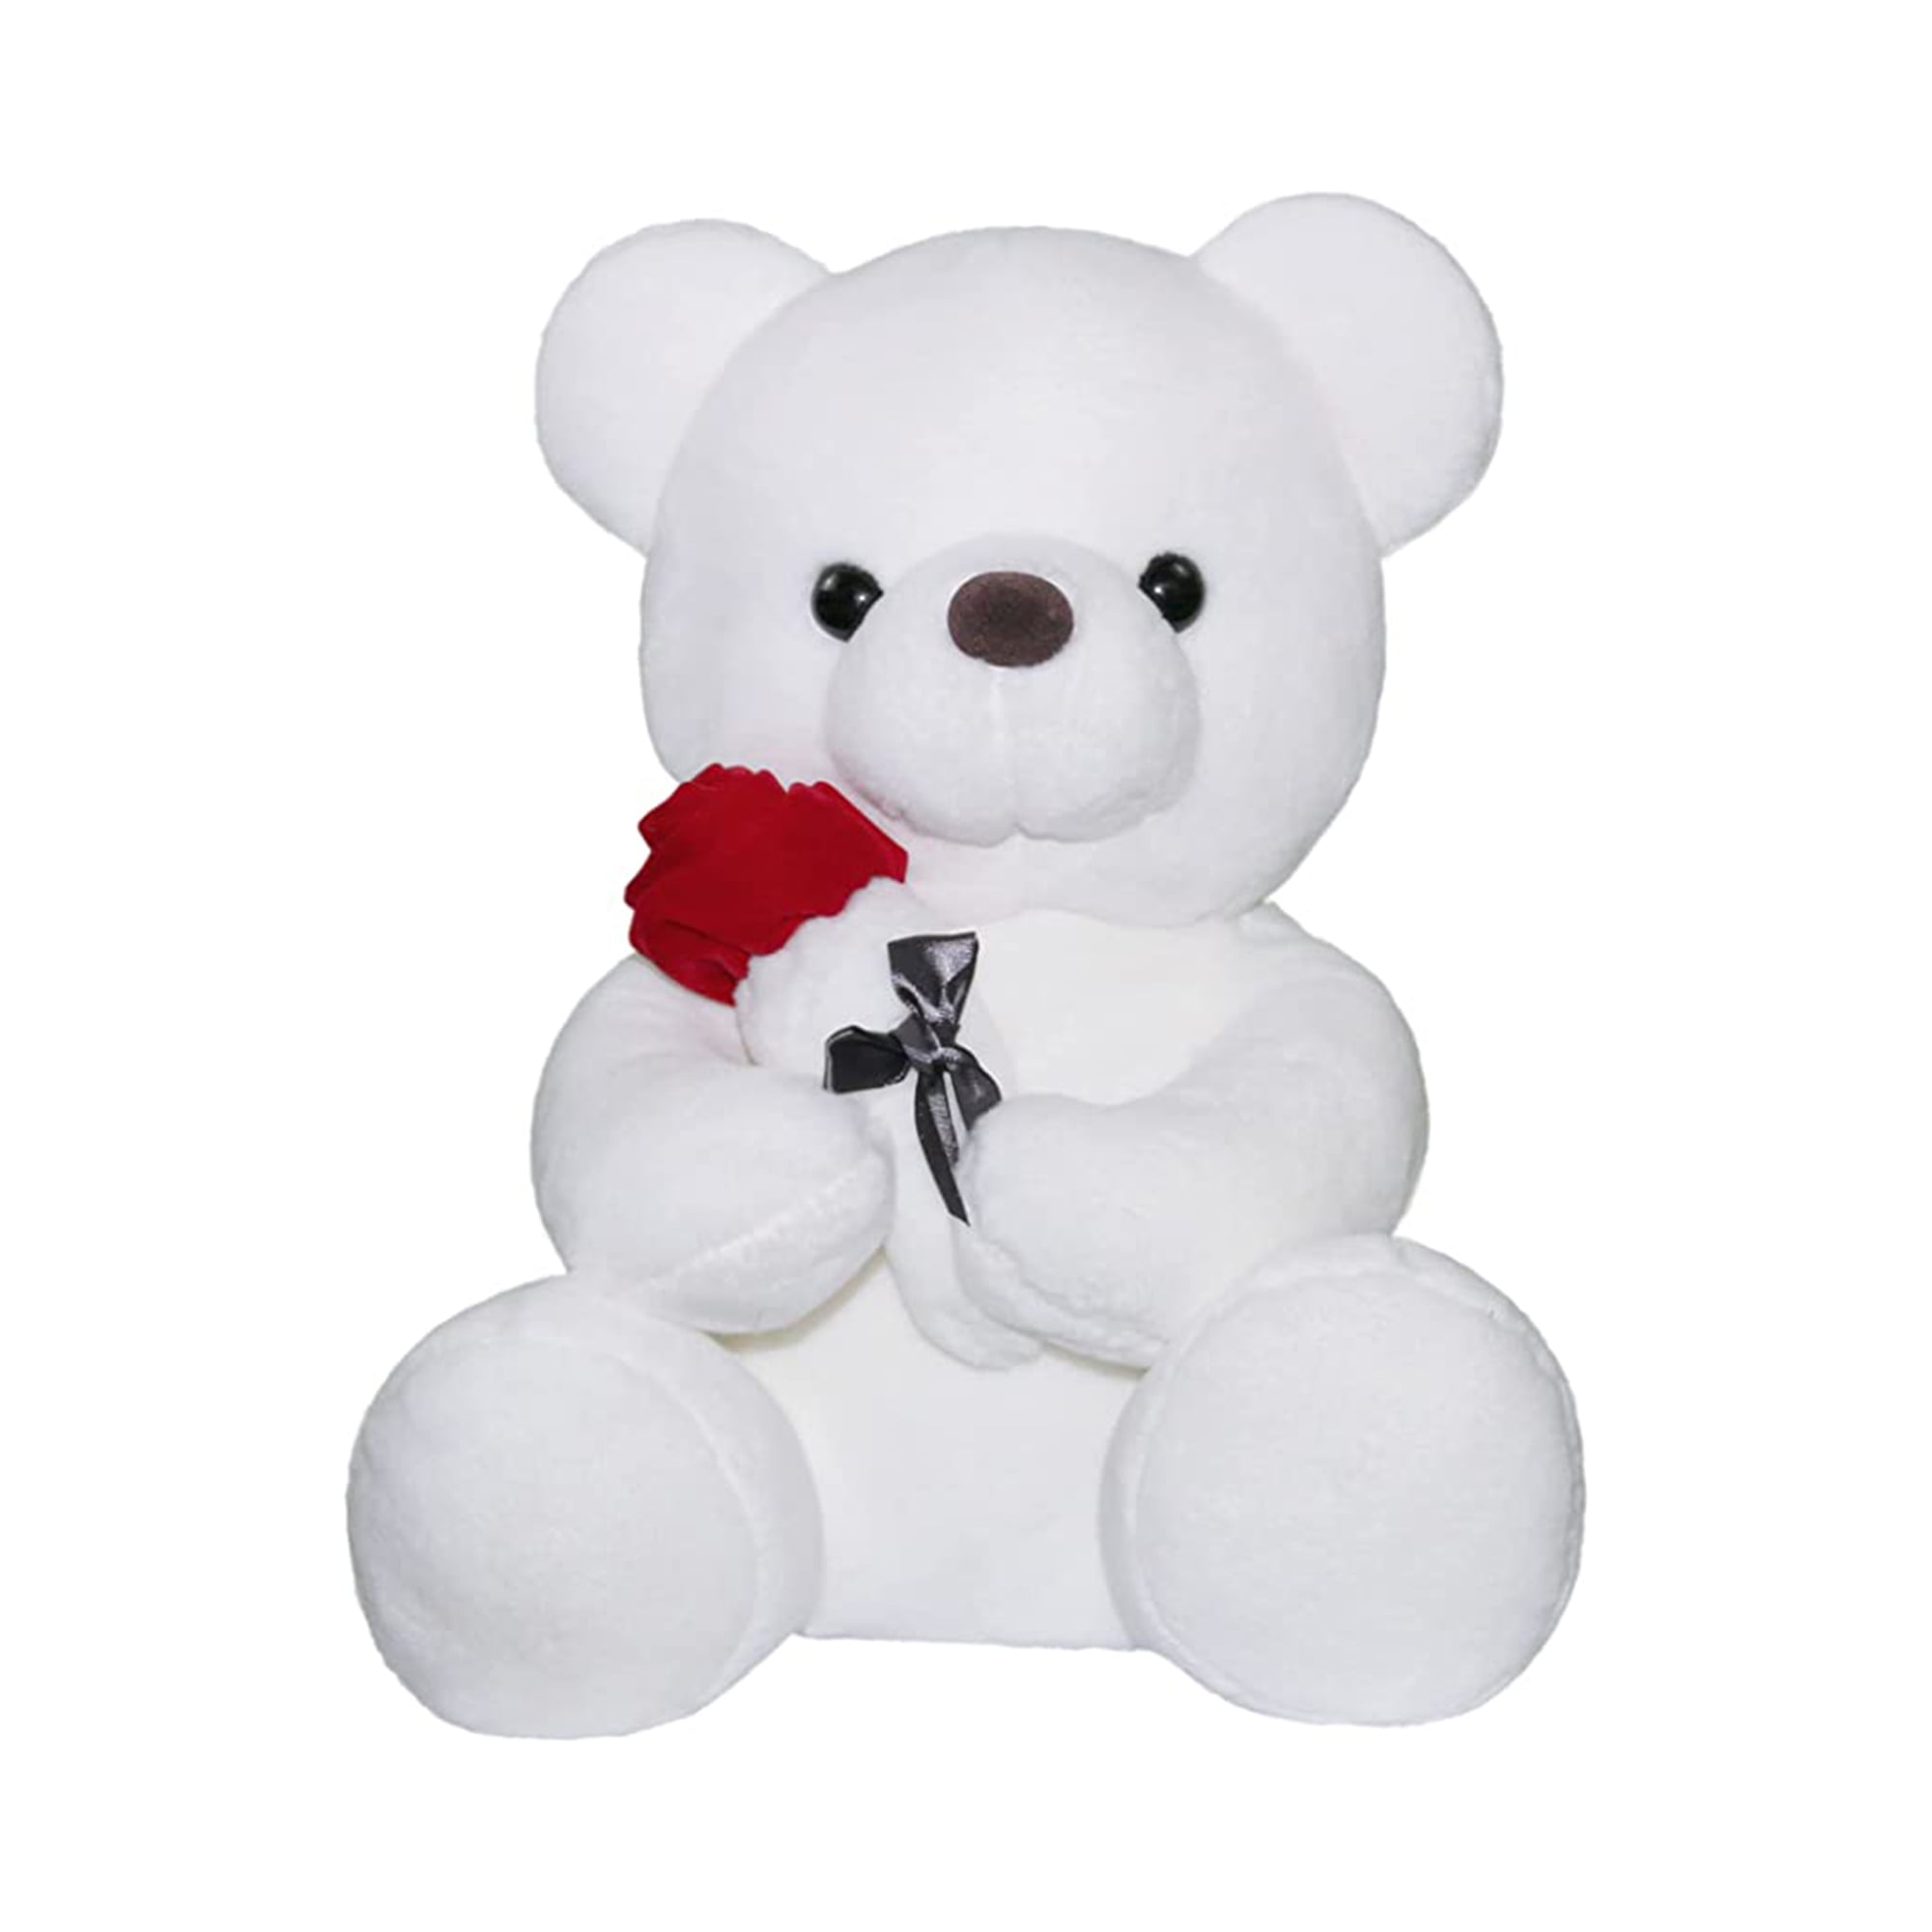 55''Big Teddy Bear White Plush Soft Toys Doll Only Cover Case No Filled Kid Gift 